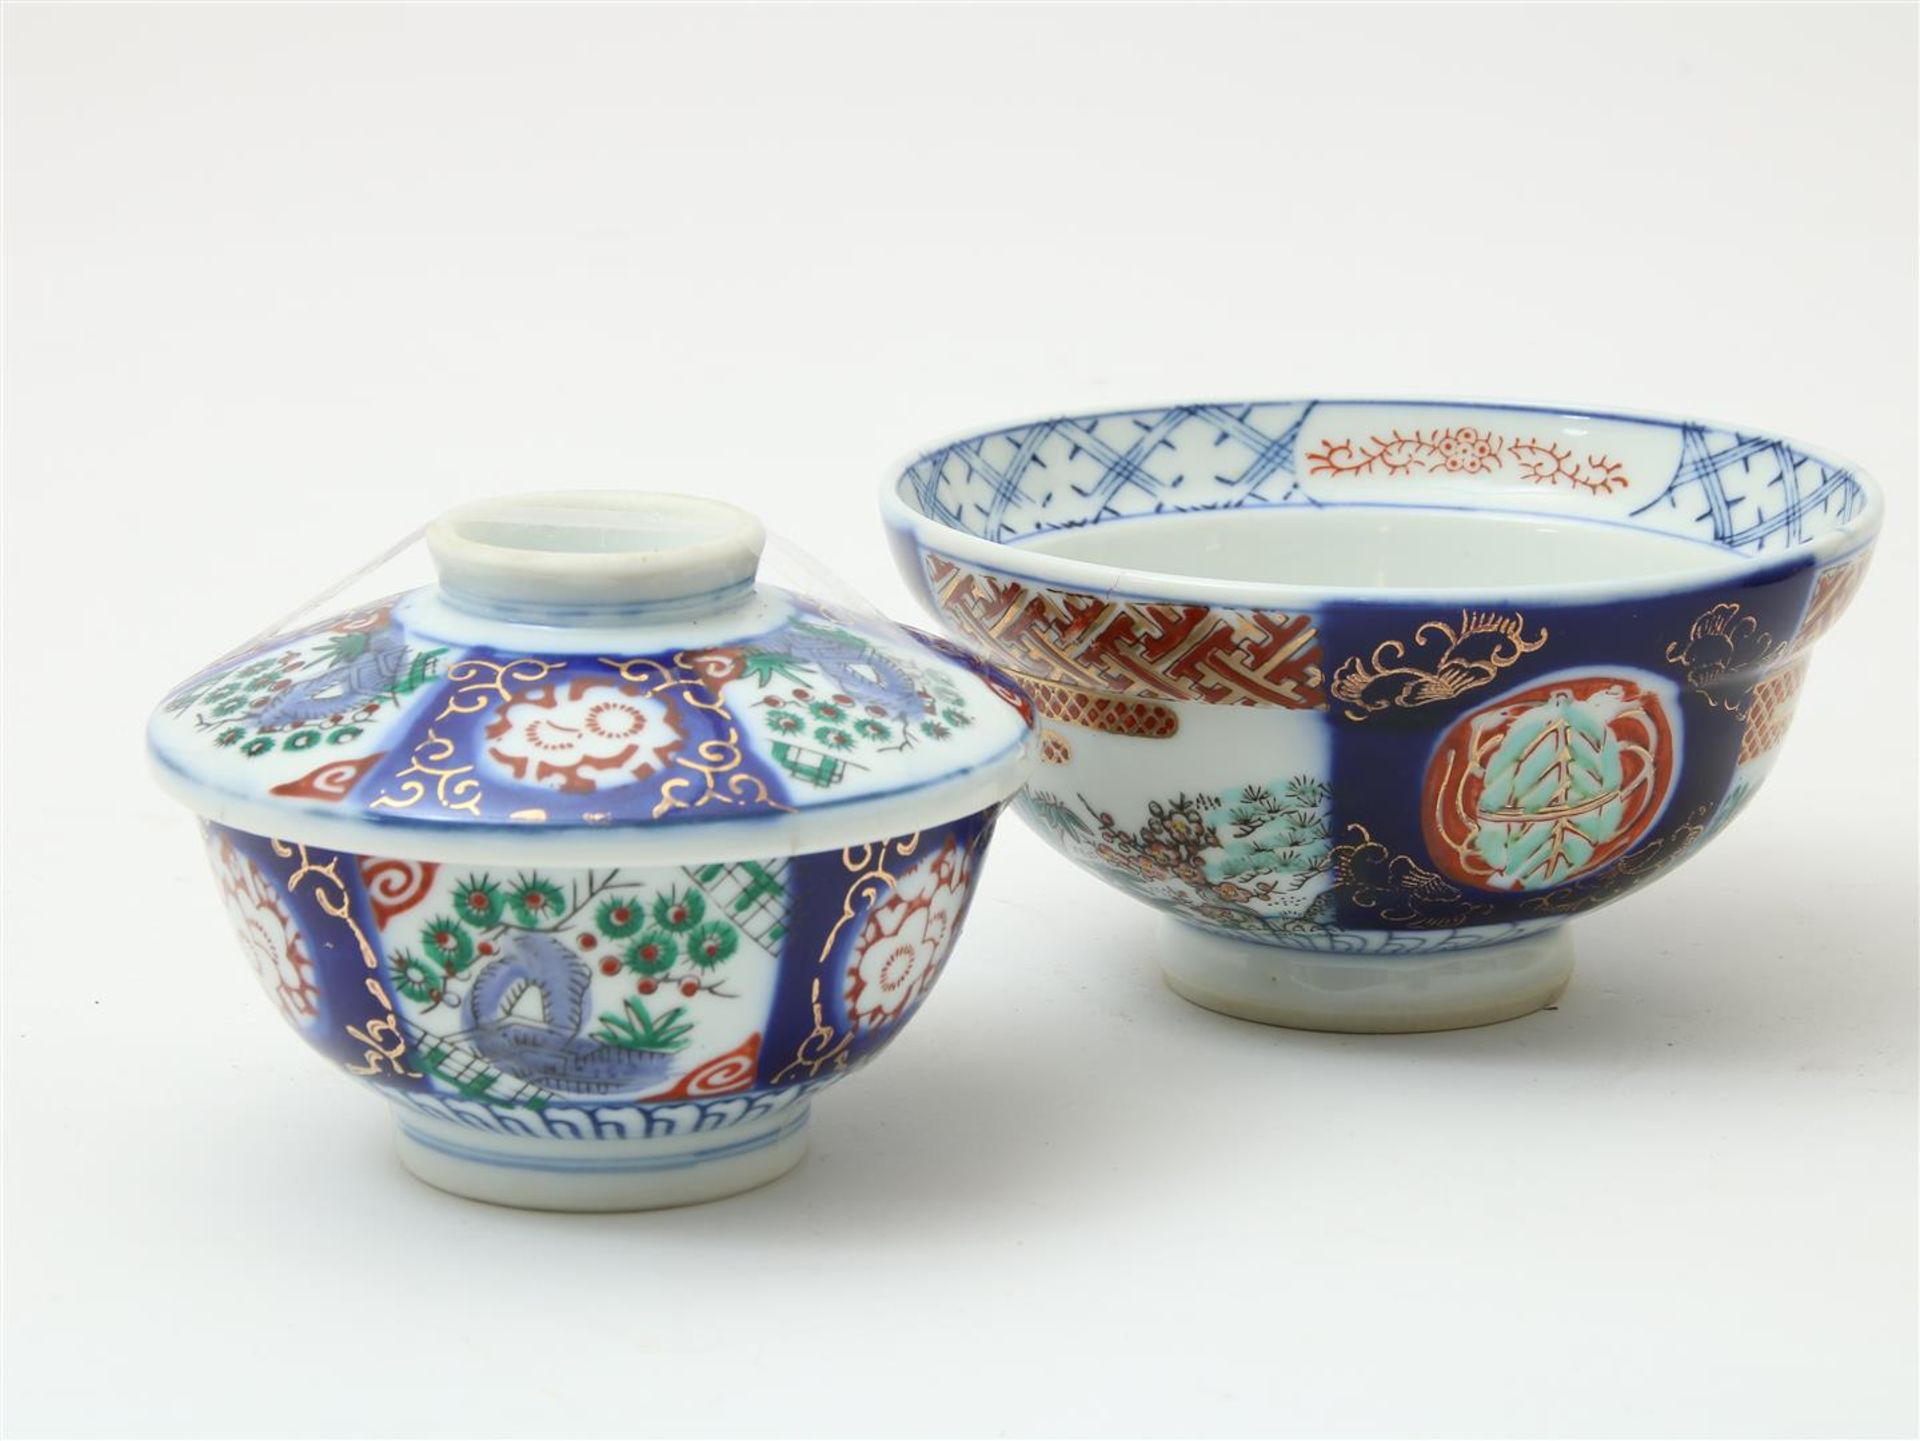 Set of Satsuma vases with decor of Geishas in panels, two imari bowls, one under lid, teapot, - Image 5 of 7